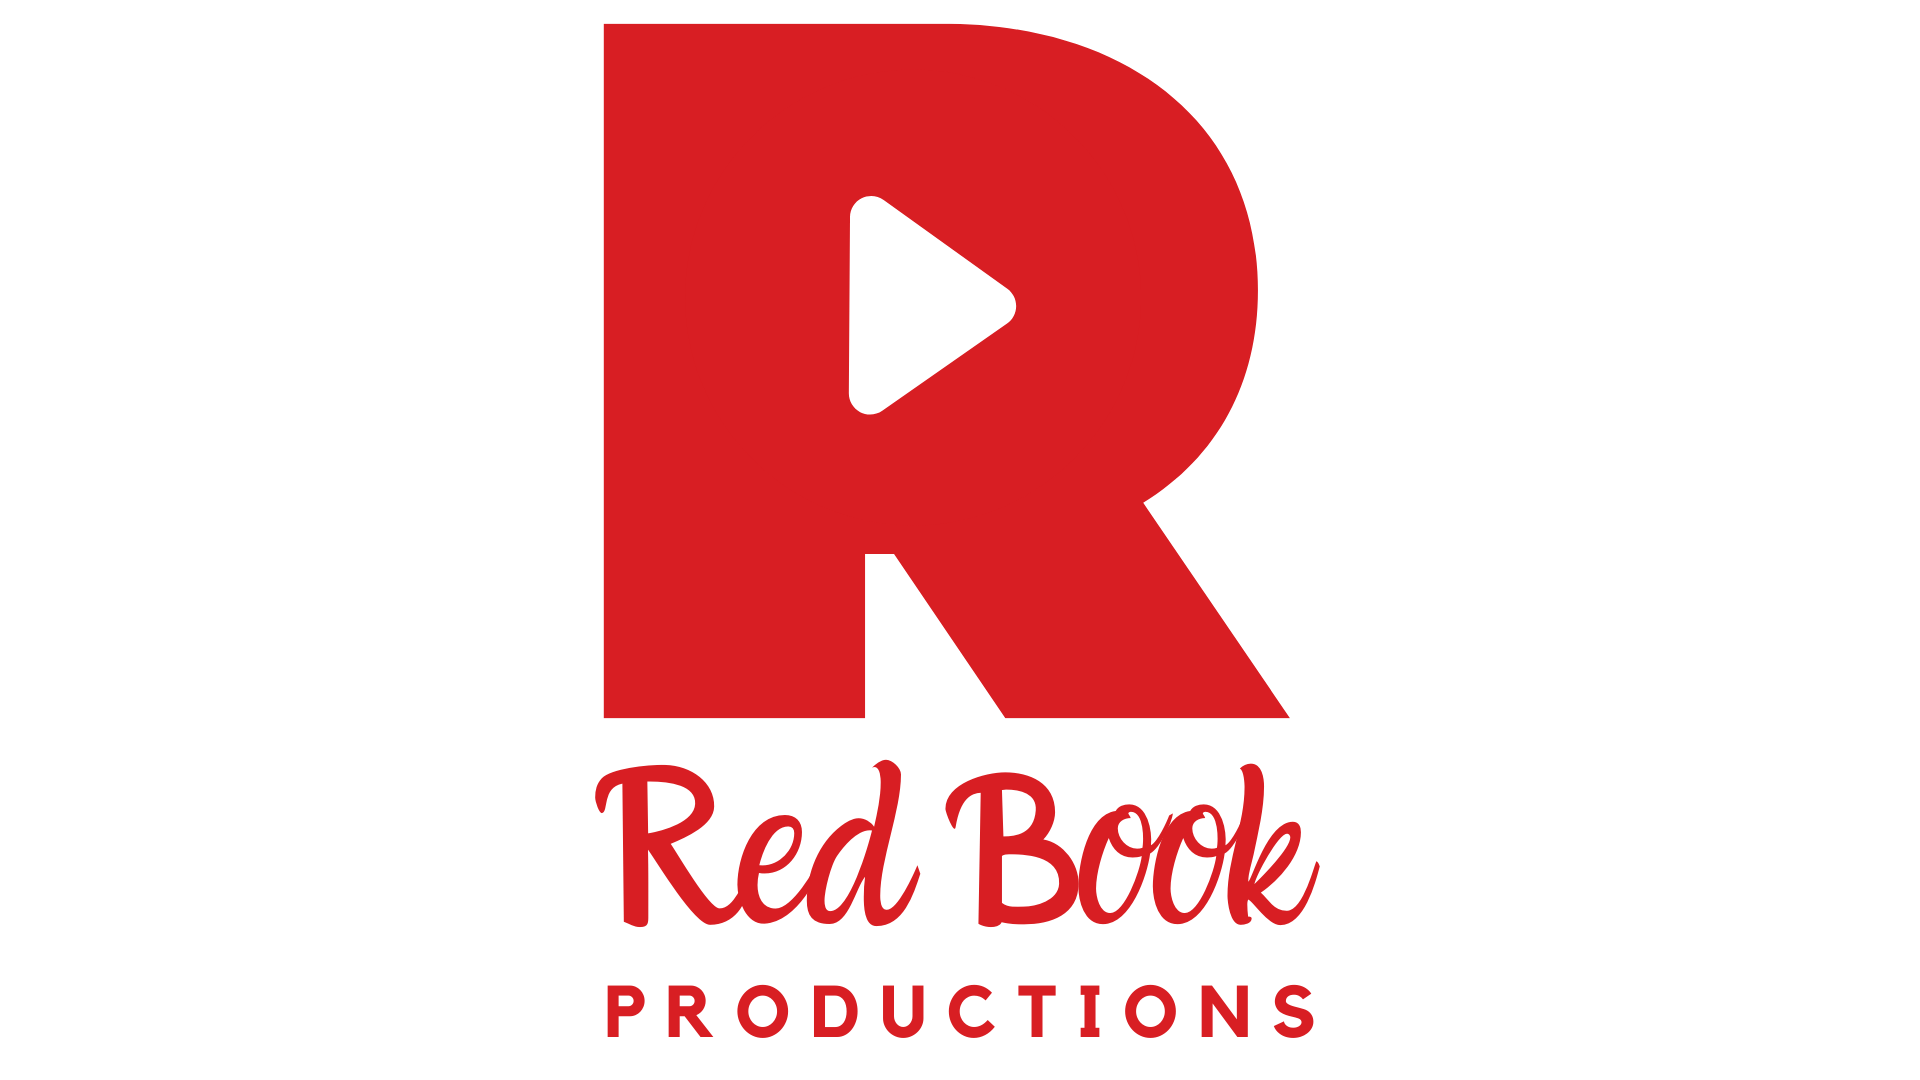 Red Book Productions